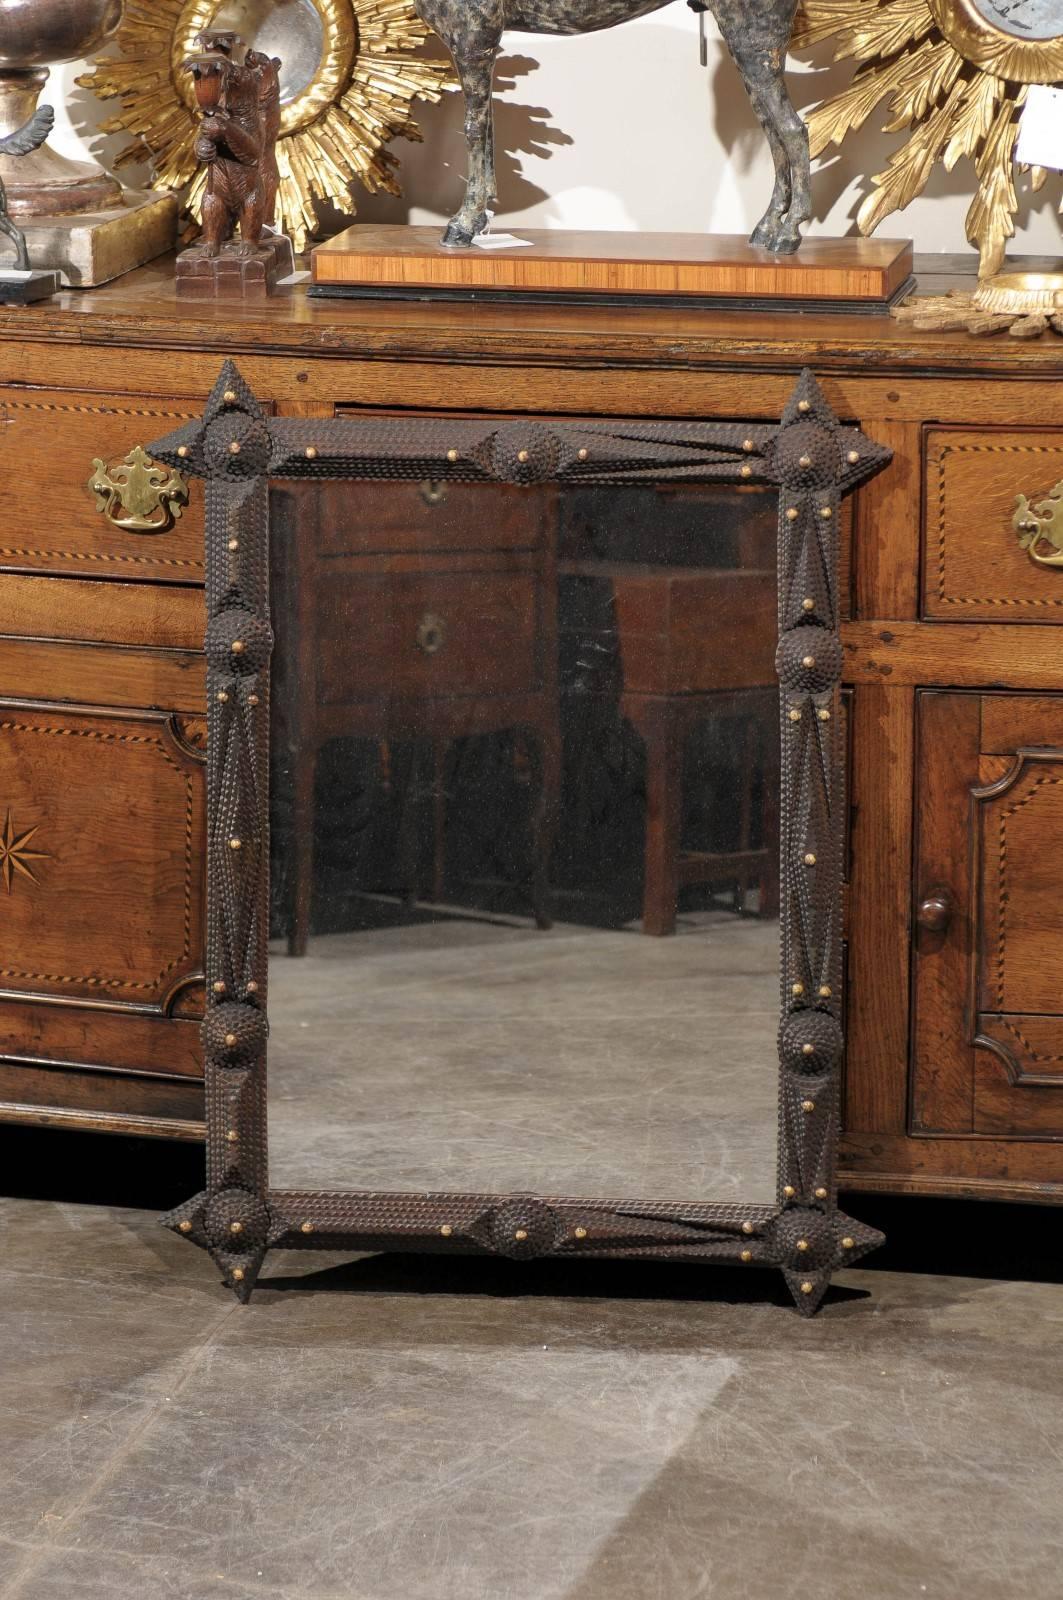 A French Tramp Art carved mirror from the turn of the century with bone inlay. This French Tramp Art mirror from circa 1900 has a vertical rectangular shape with the unmistakable Tramp Art texturized signature: the technique of notching and layering